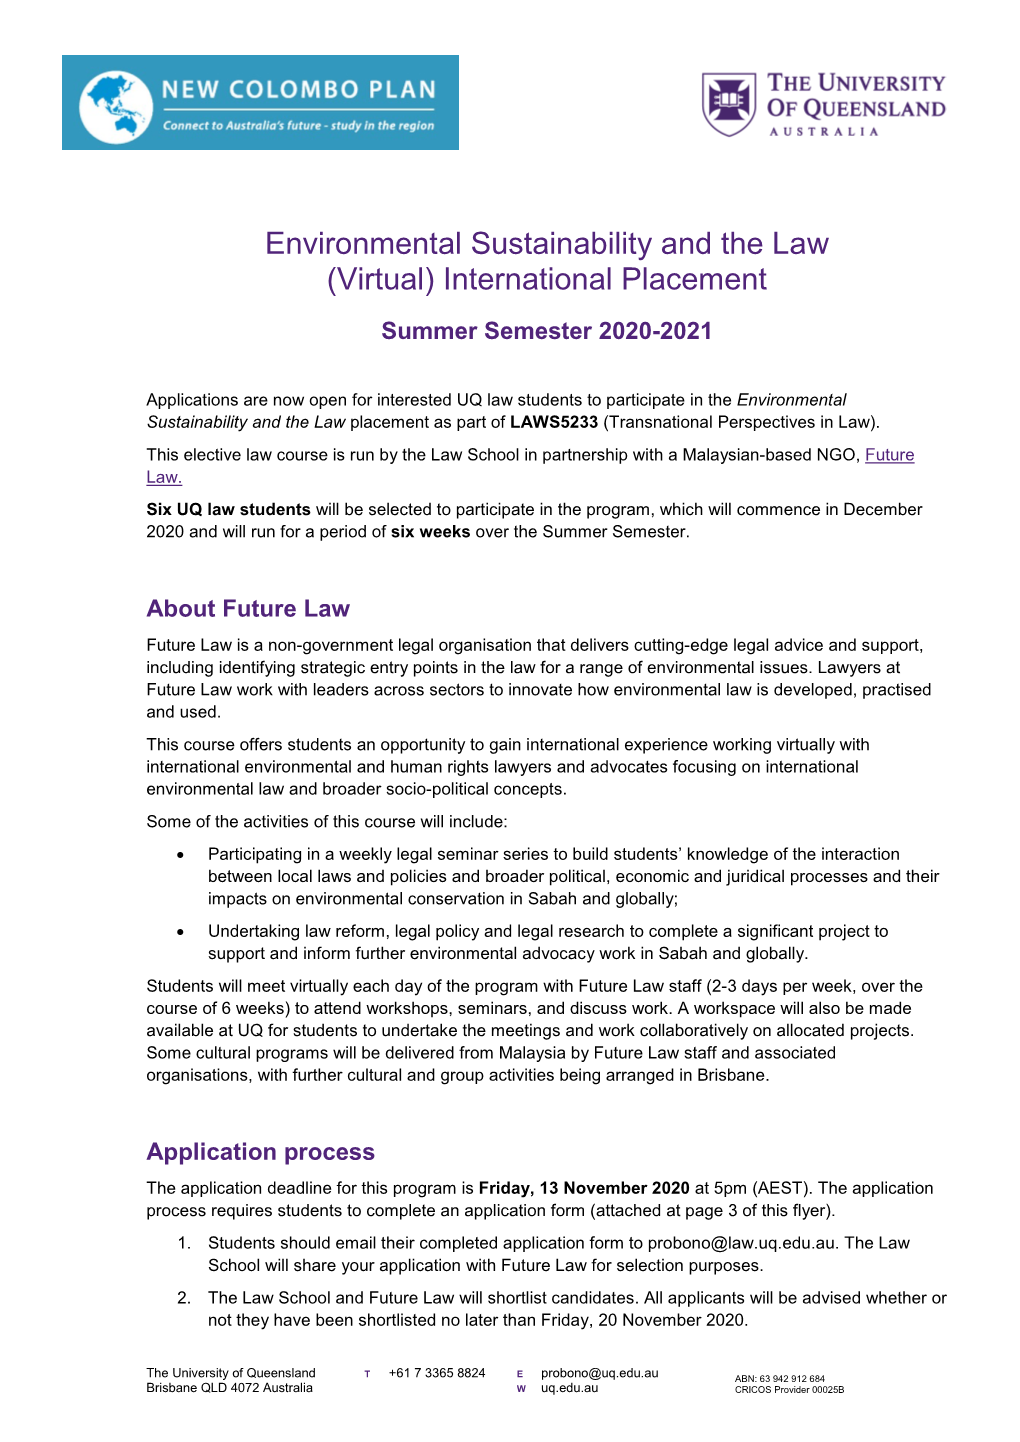 Environmental Sustainability and the Law (Virtual) International Placement